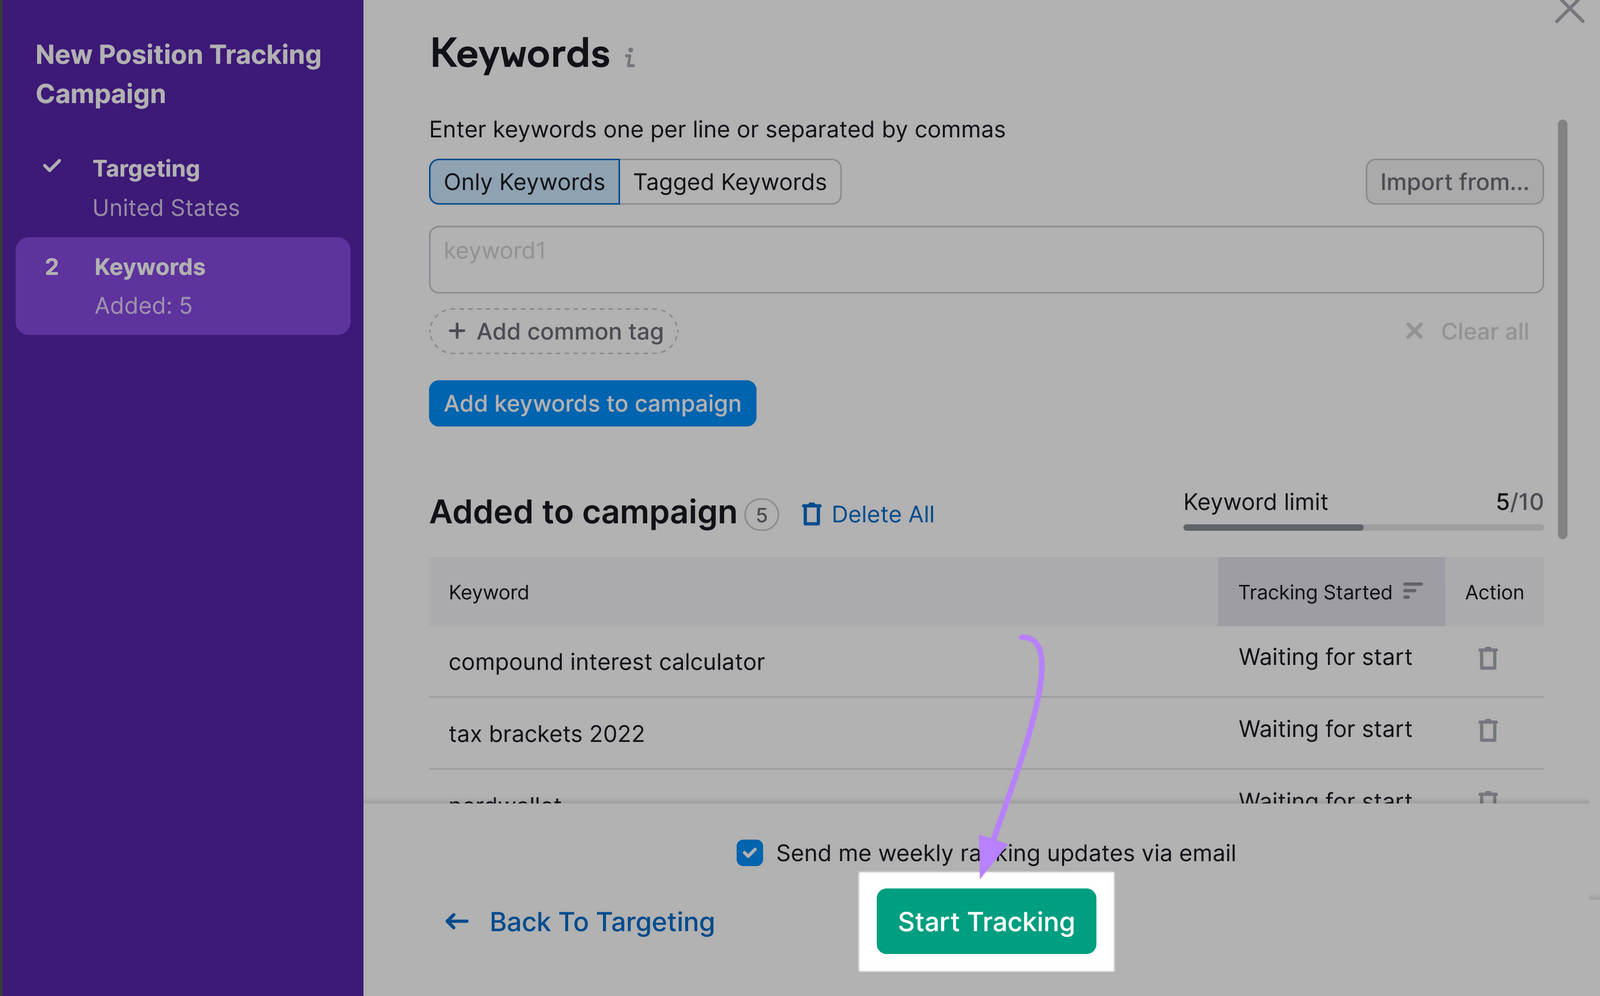 “Start Tracking” button highlighted